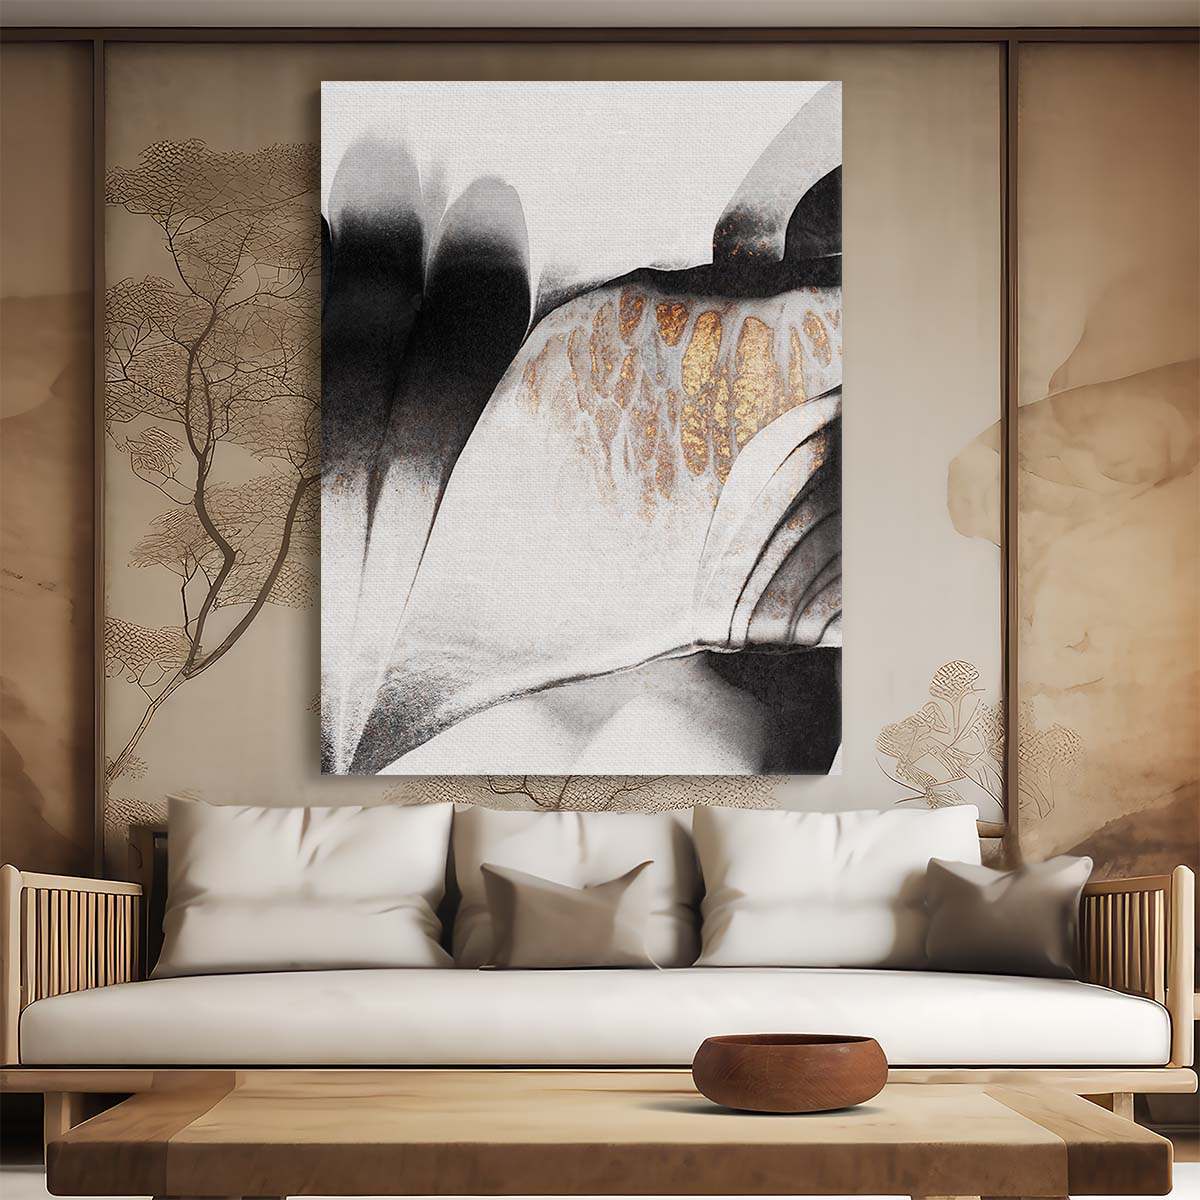 Golden Abstract Geometric Shapes Illustration in Black & White by Luxuriance Designs, made in USA